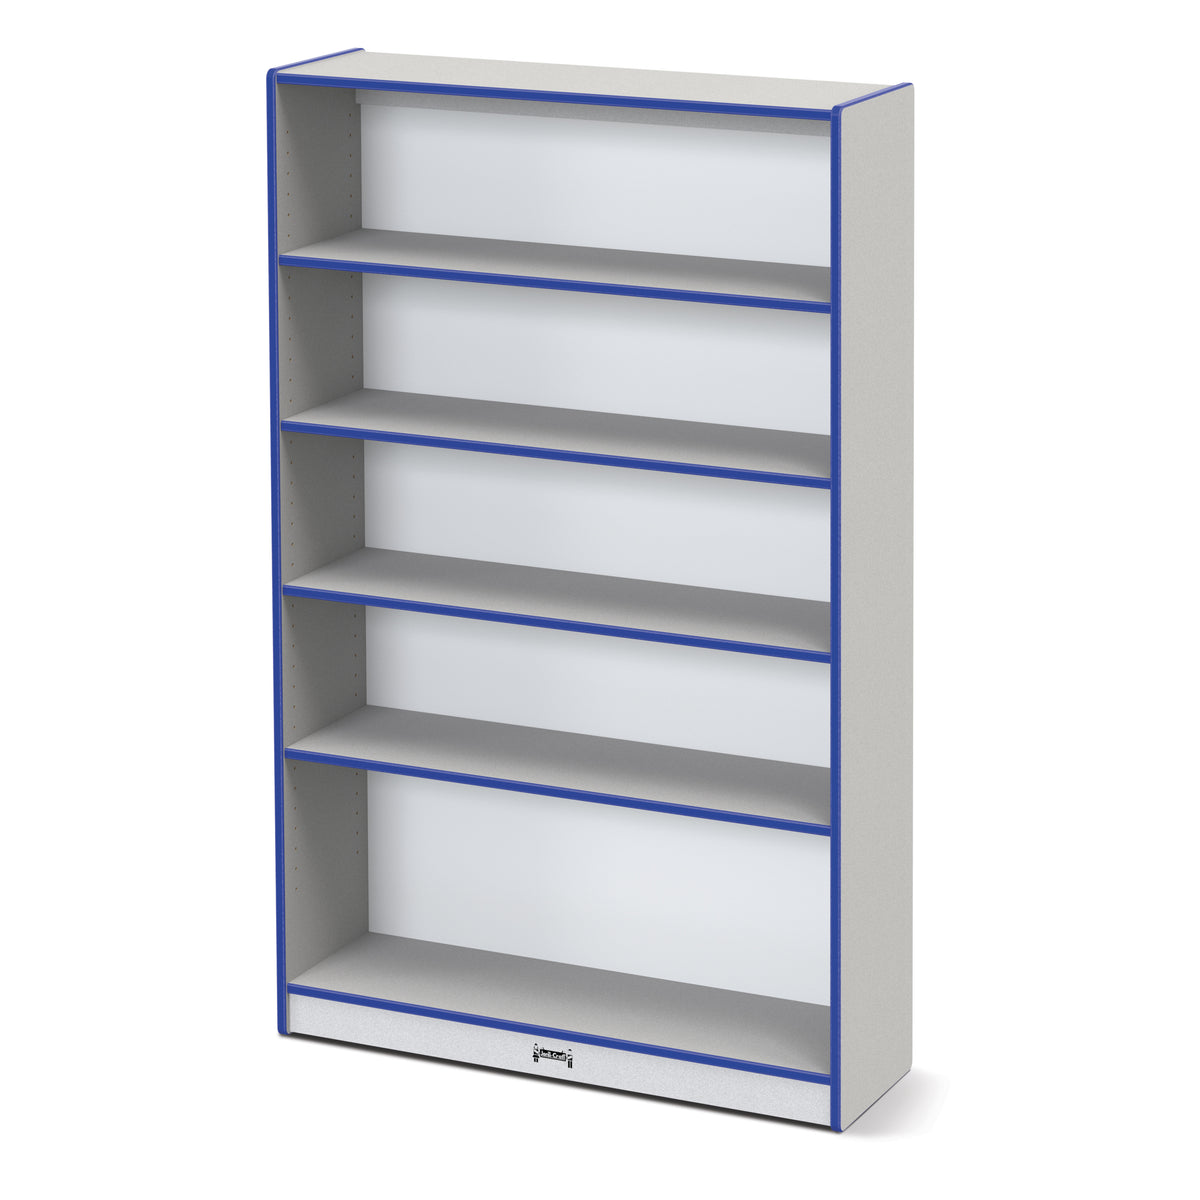 0972JC003, Rainbow Accents Tall Bookcase - Blue